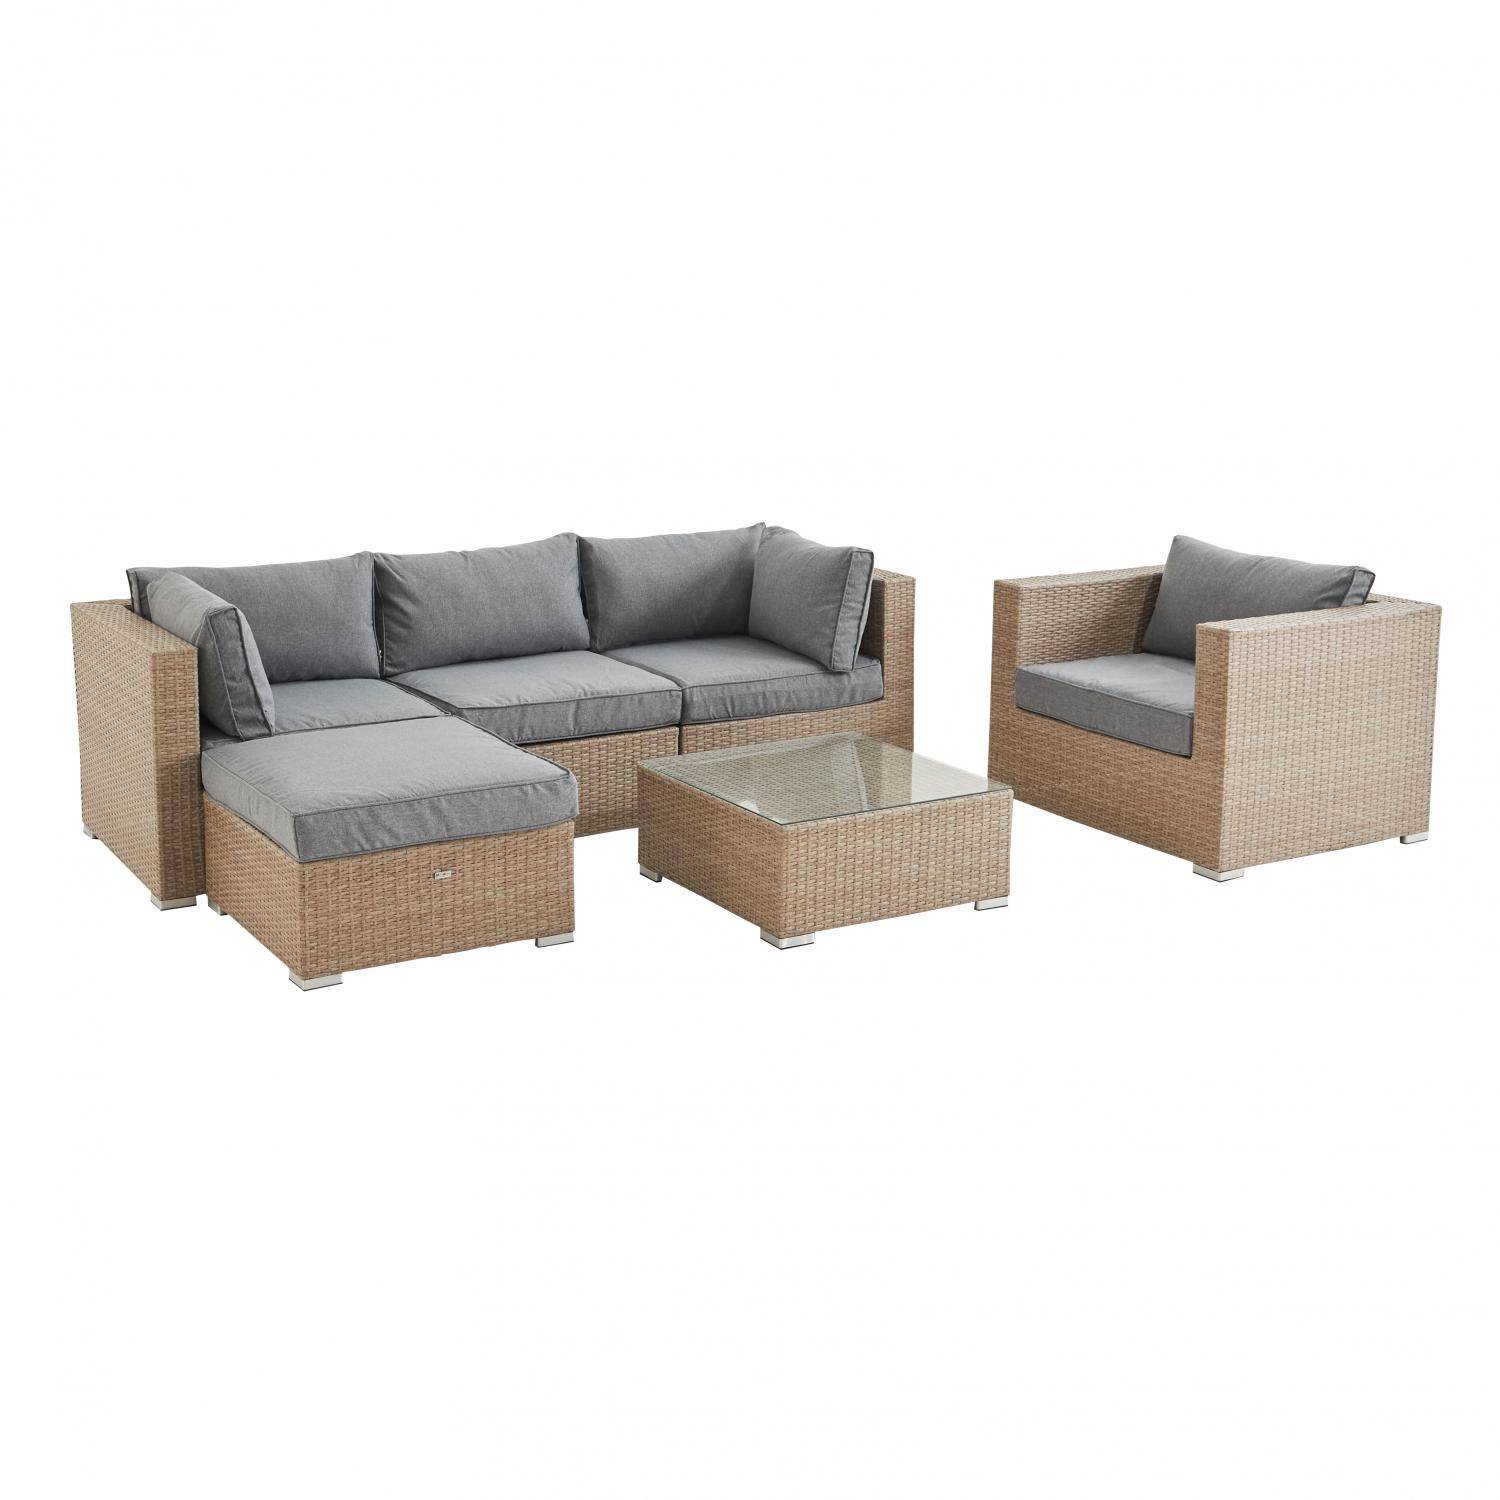 Ready assembled 5-seater polyrattan garden sofa set with coffee table, Beige & Light Heather Grey Photo2